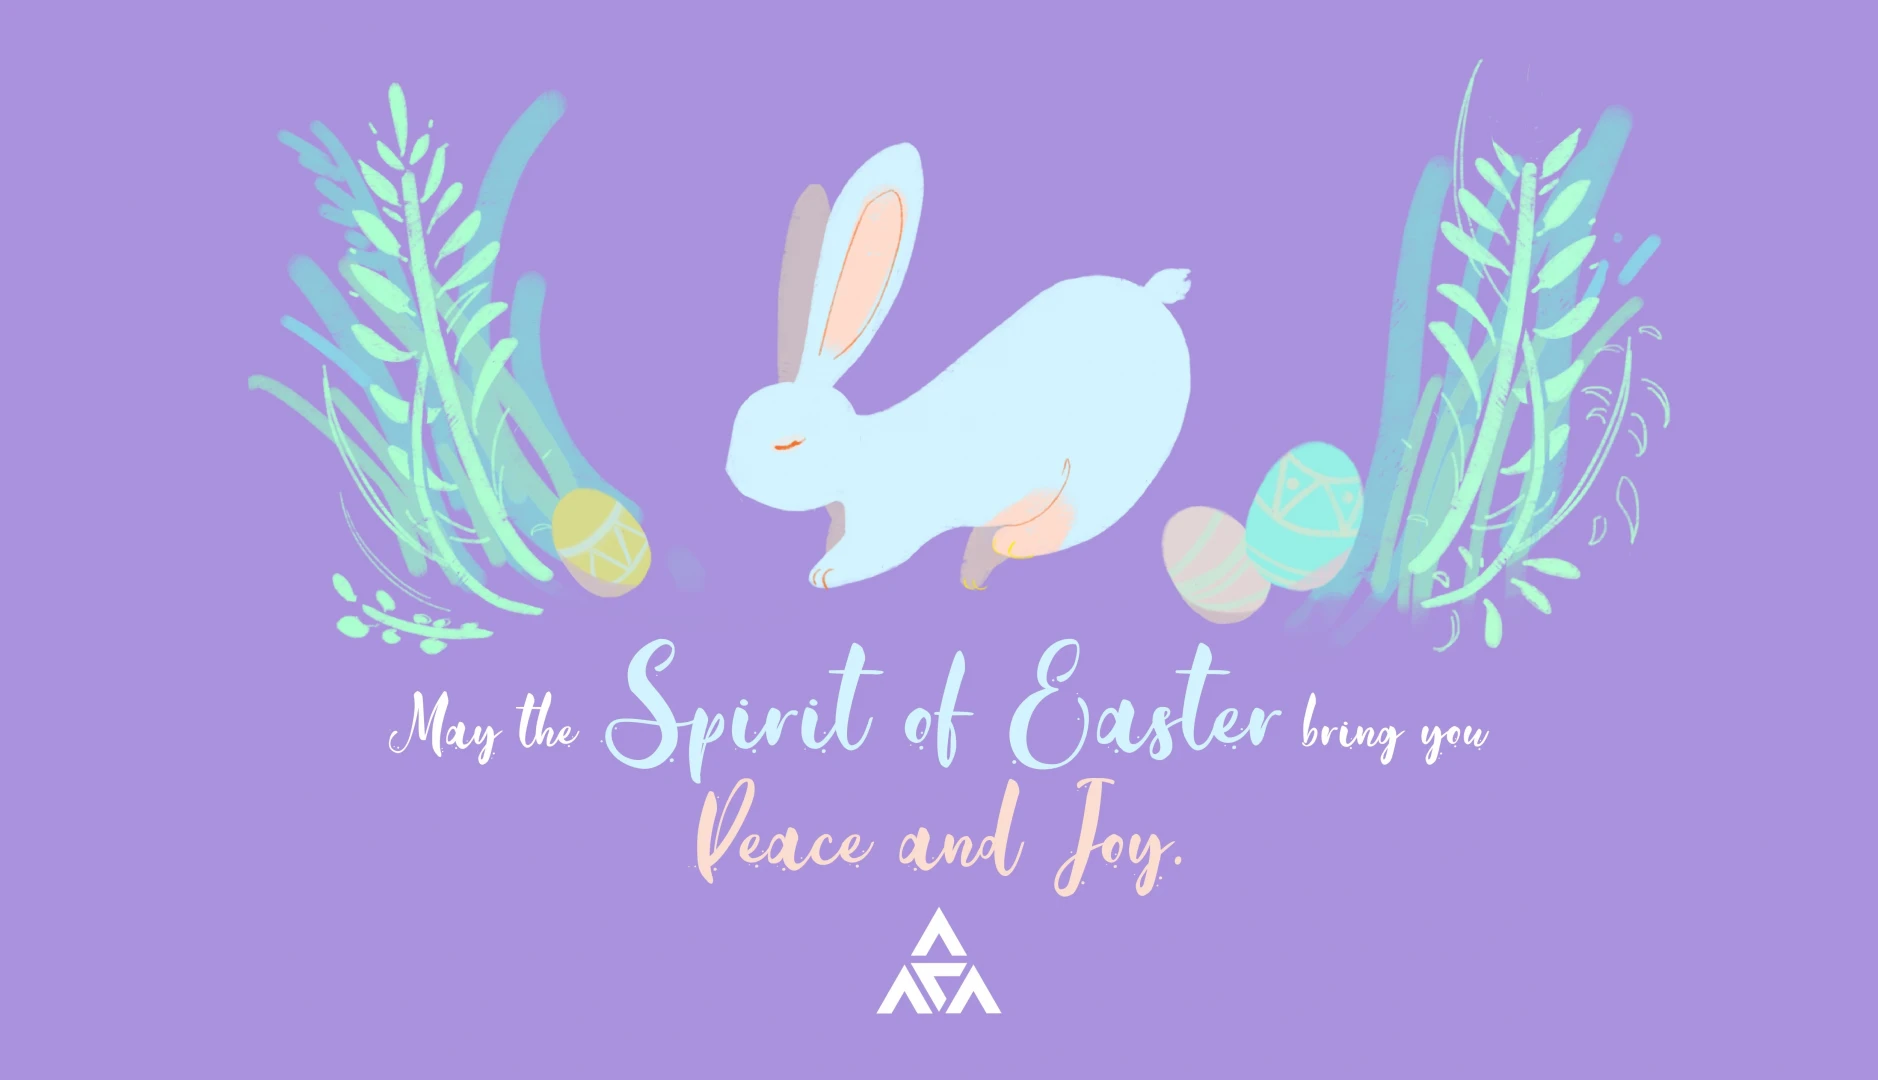 Happy Easter from SRCE!